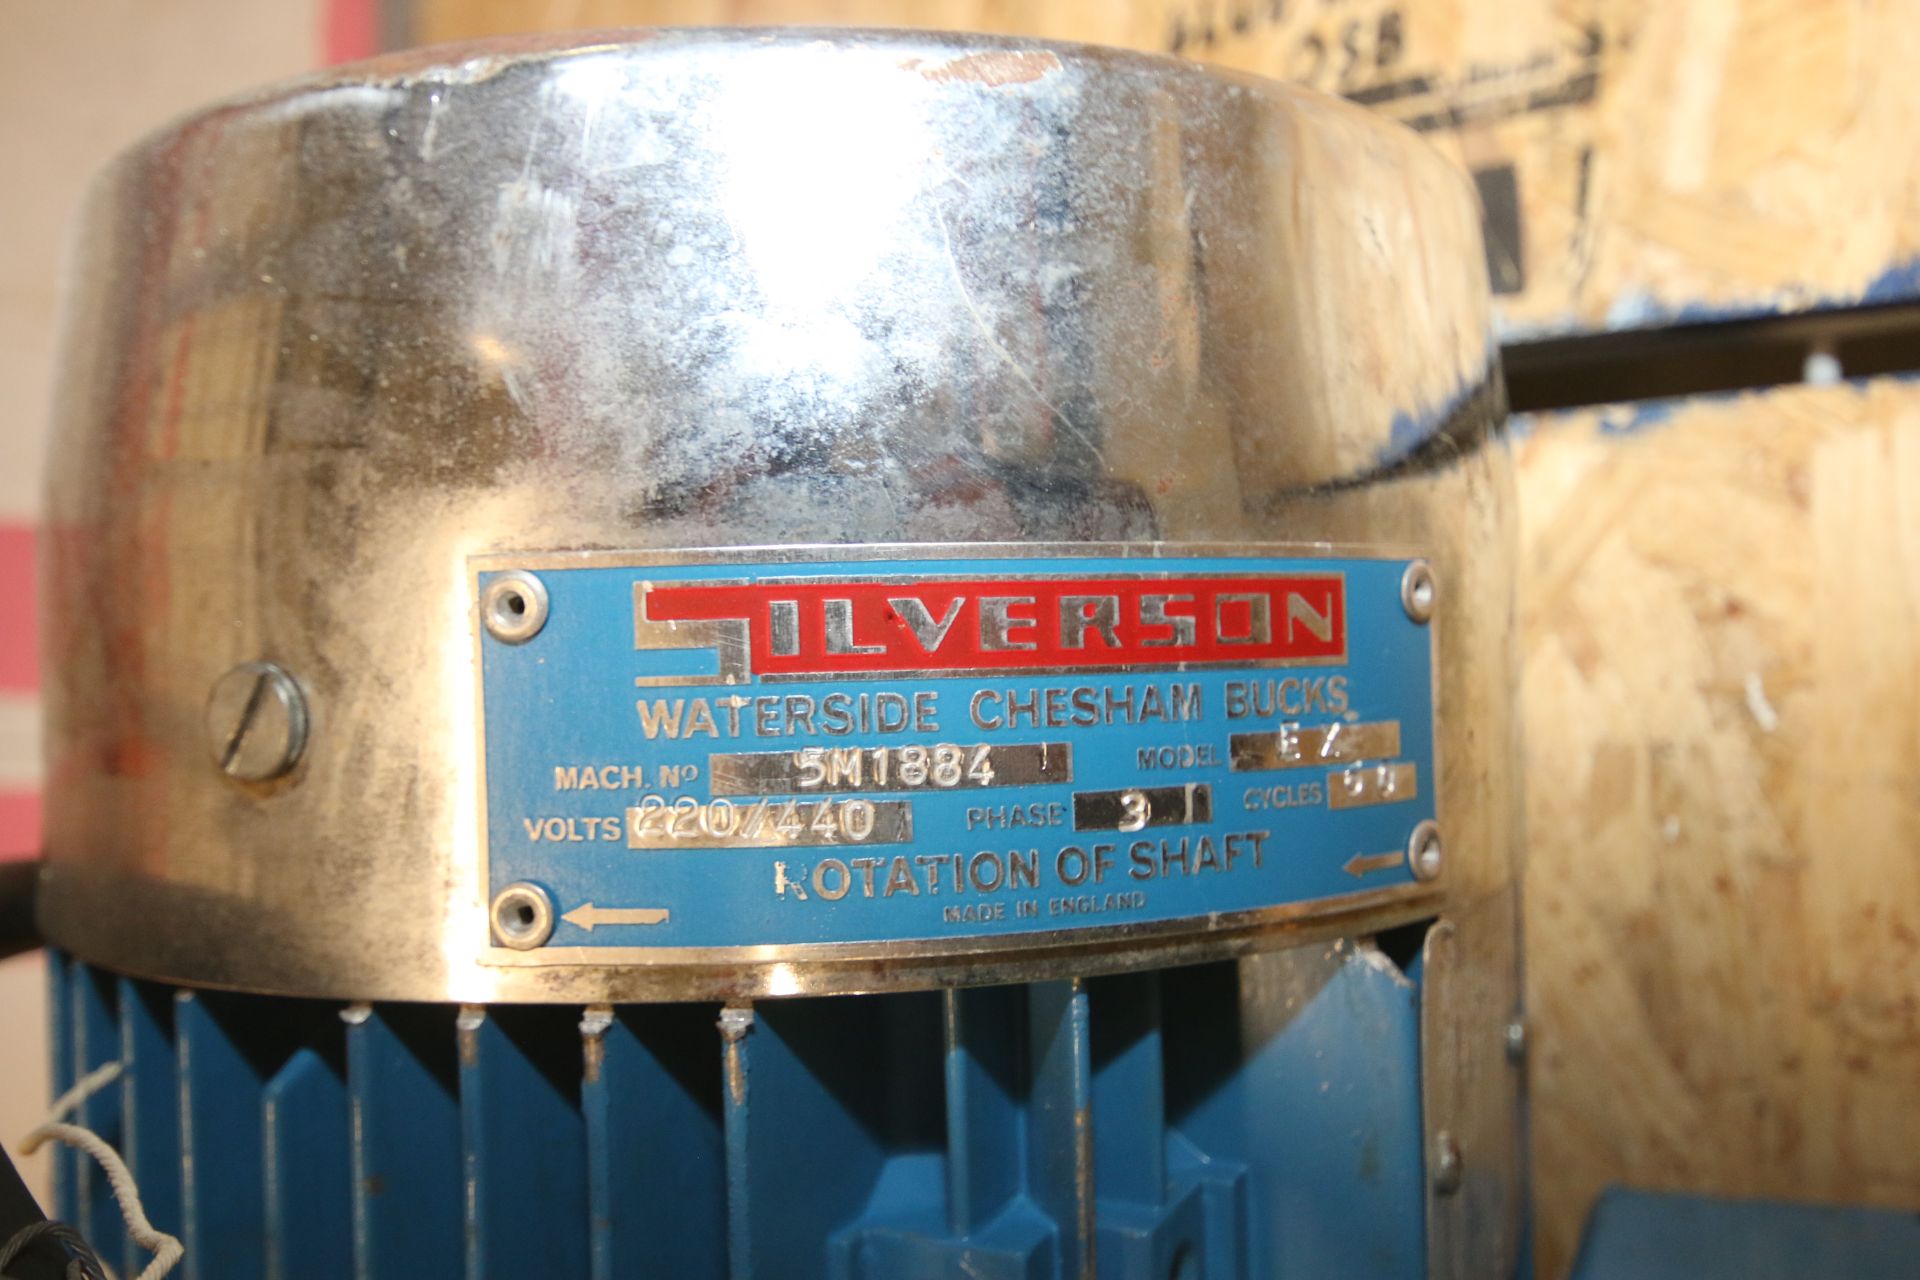 Silverson High Shear Mixer, Model EX, Machine 5M1884, 220/440 V, 3 Phase with 5-1/2 hp, 3470 RPM - Image 3 of 3